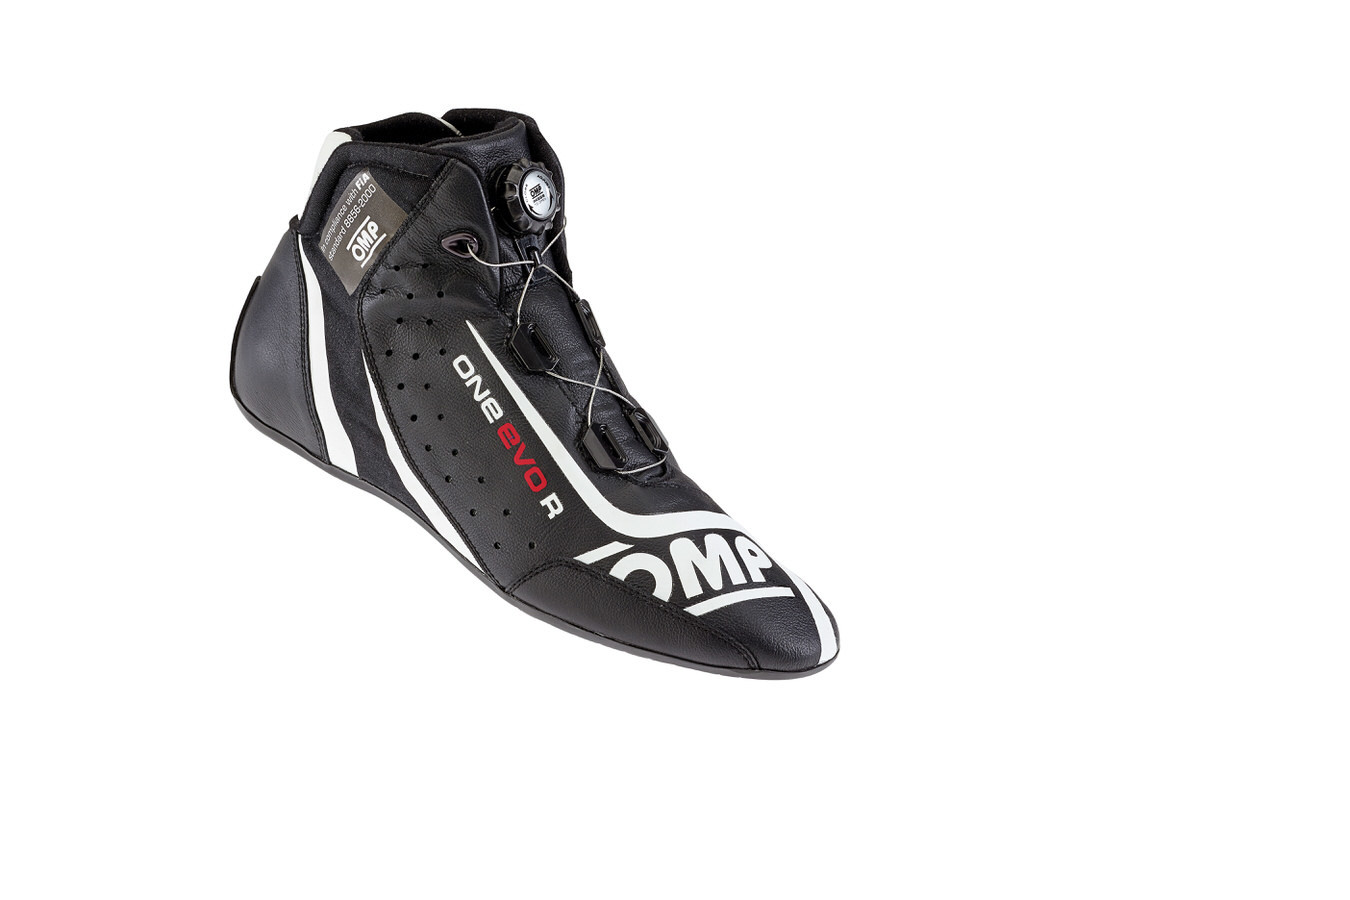 OMP Racing IC80507147 - Shoe, One Evo R, Driving, Mid-Top, FIA Approved, Leather Outer, Fire Retardant Fabric Inner, Black, Euro Size 47, Pair